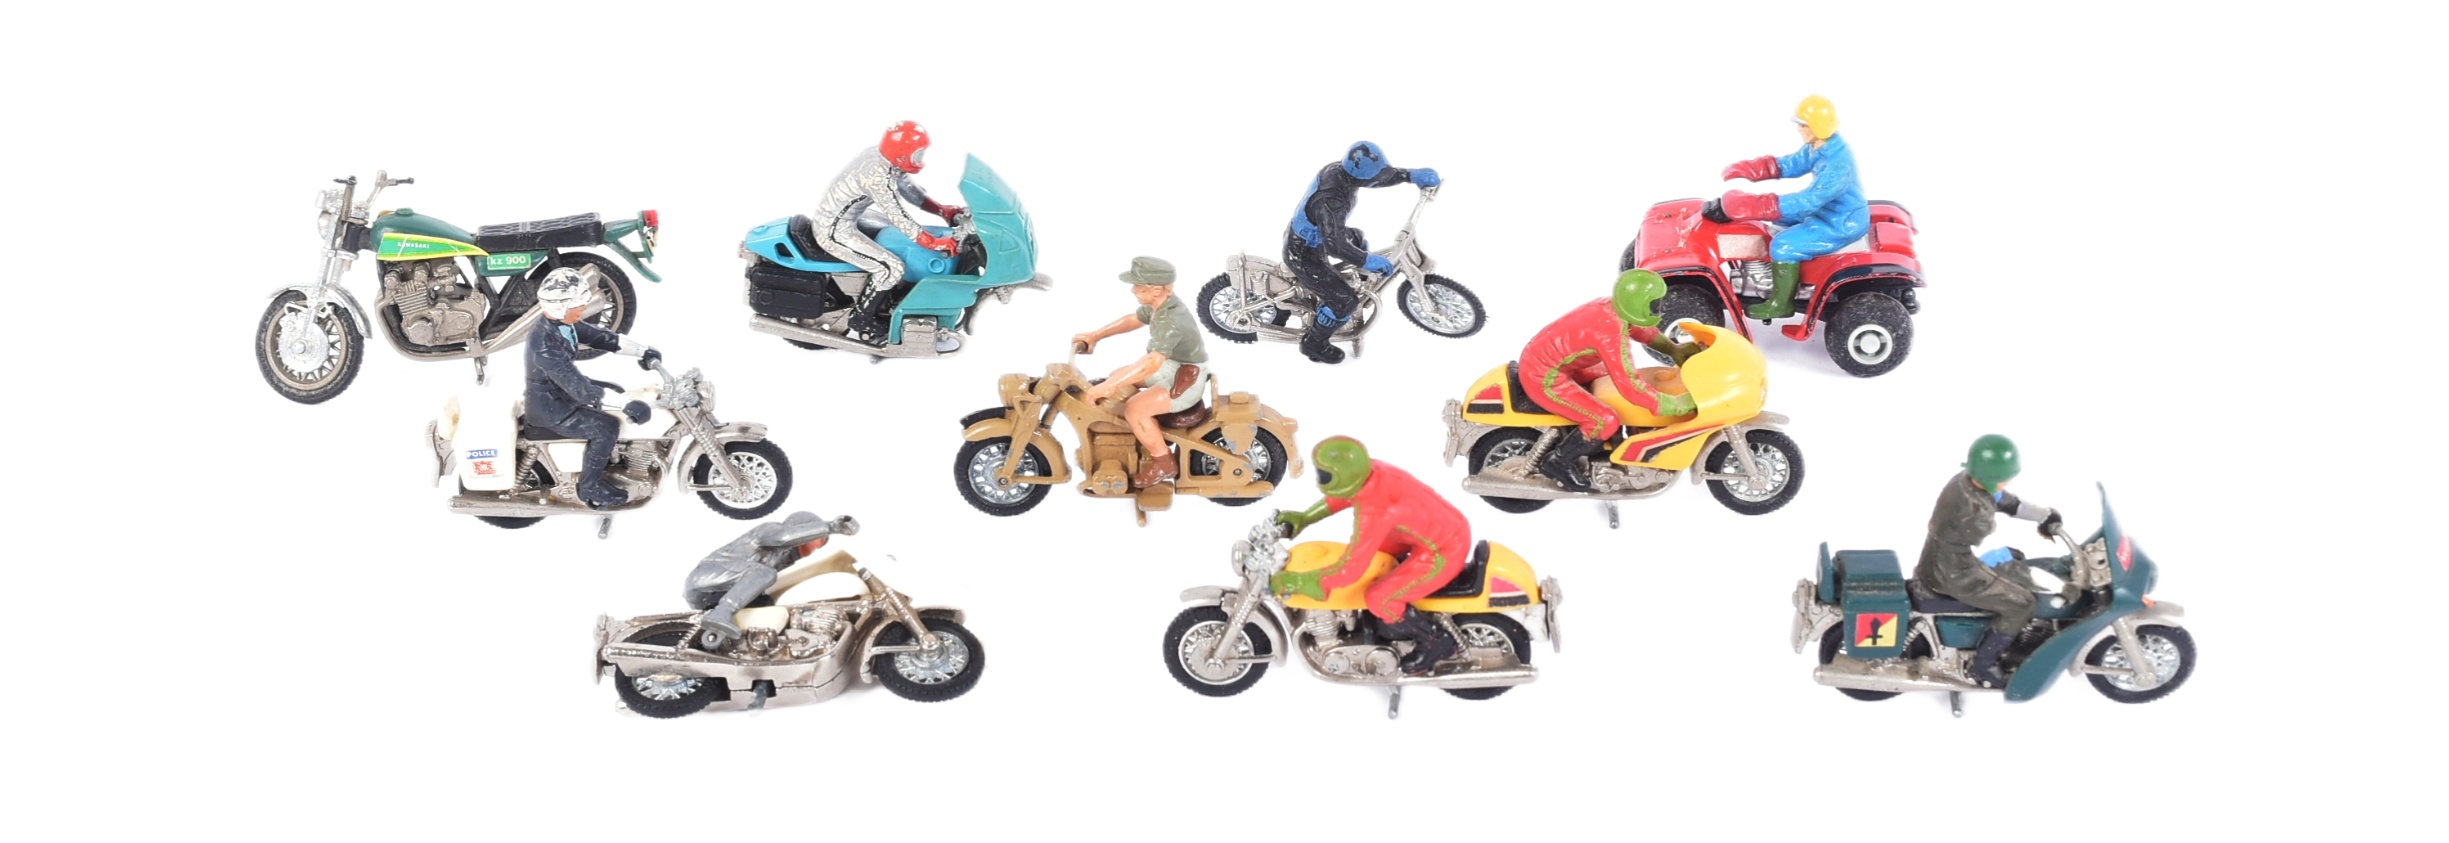 COLLECTION OF VINTAGE BRITAINS MOTORCYCLES